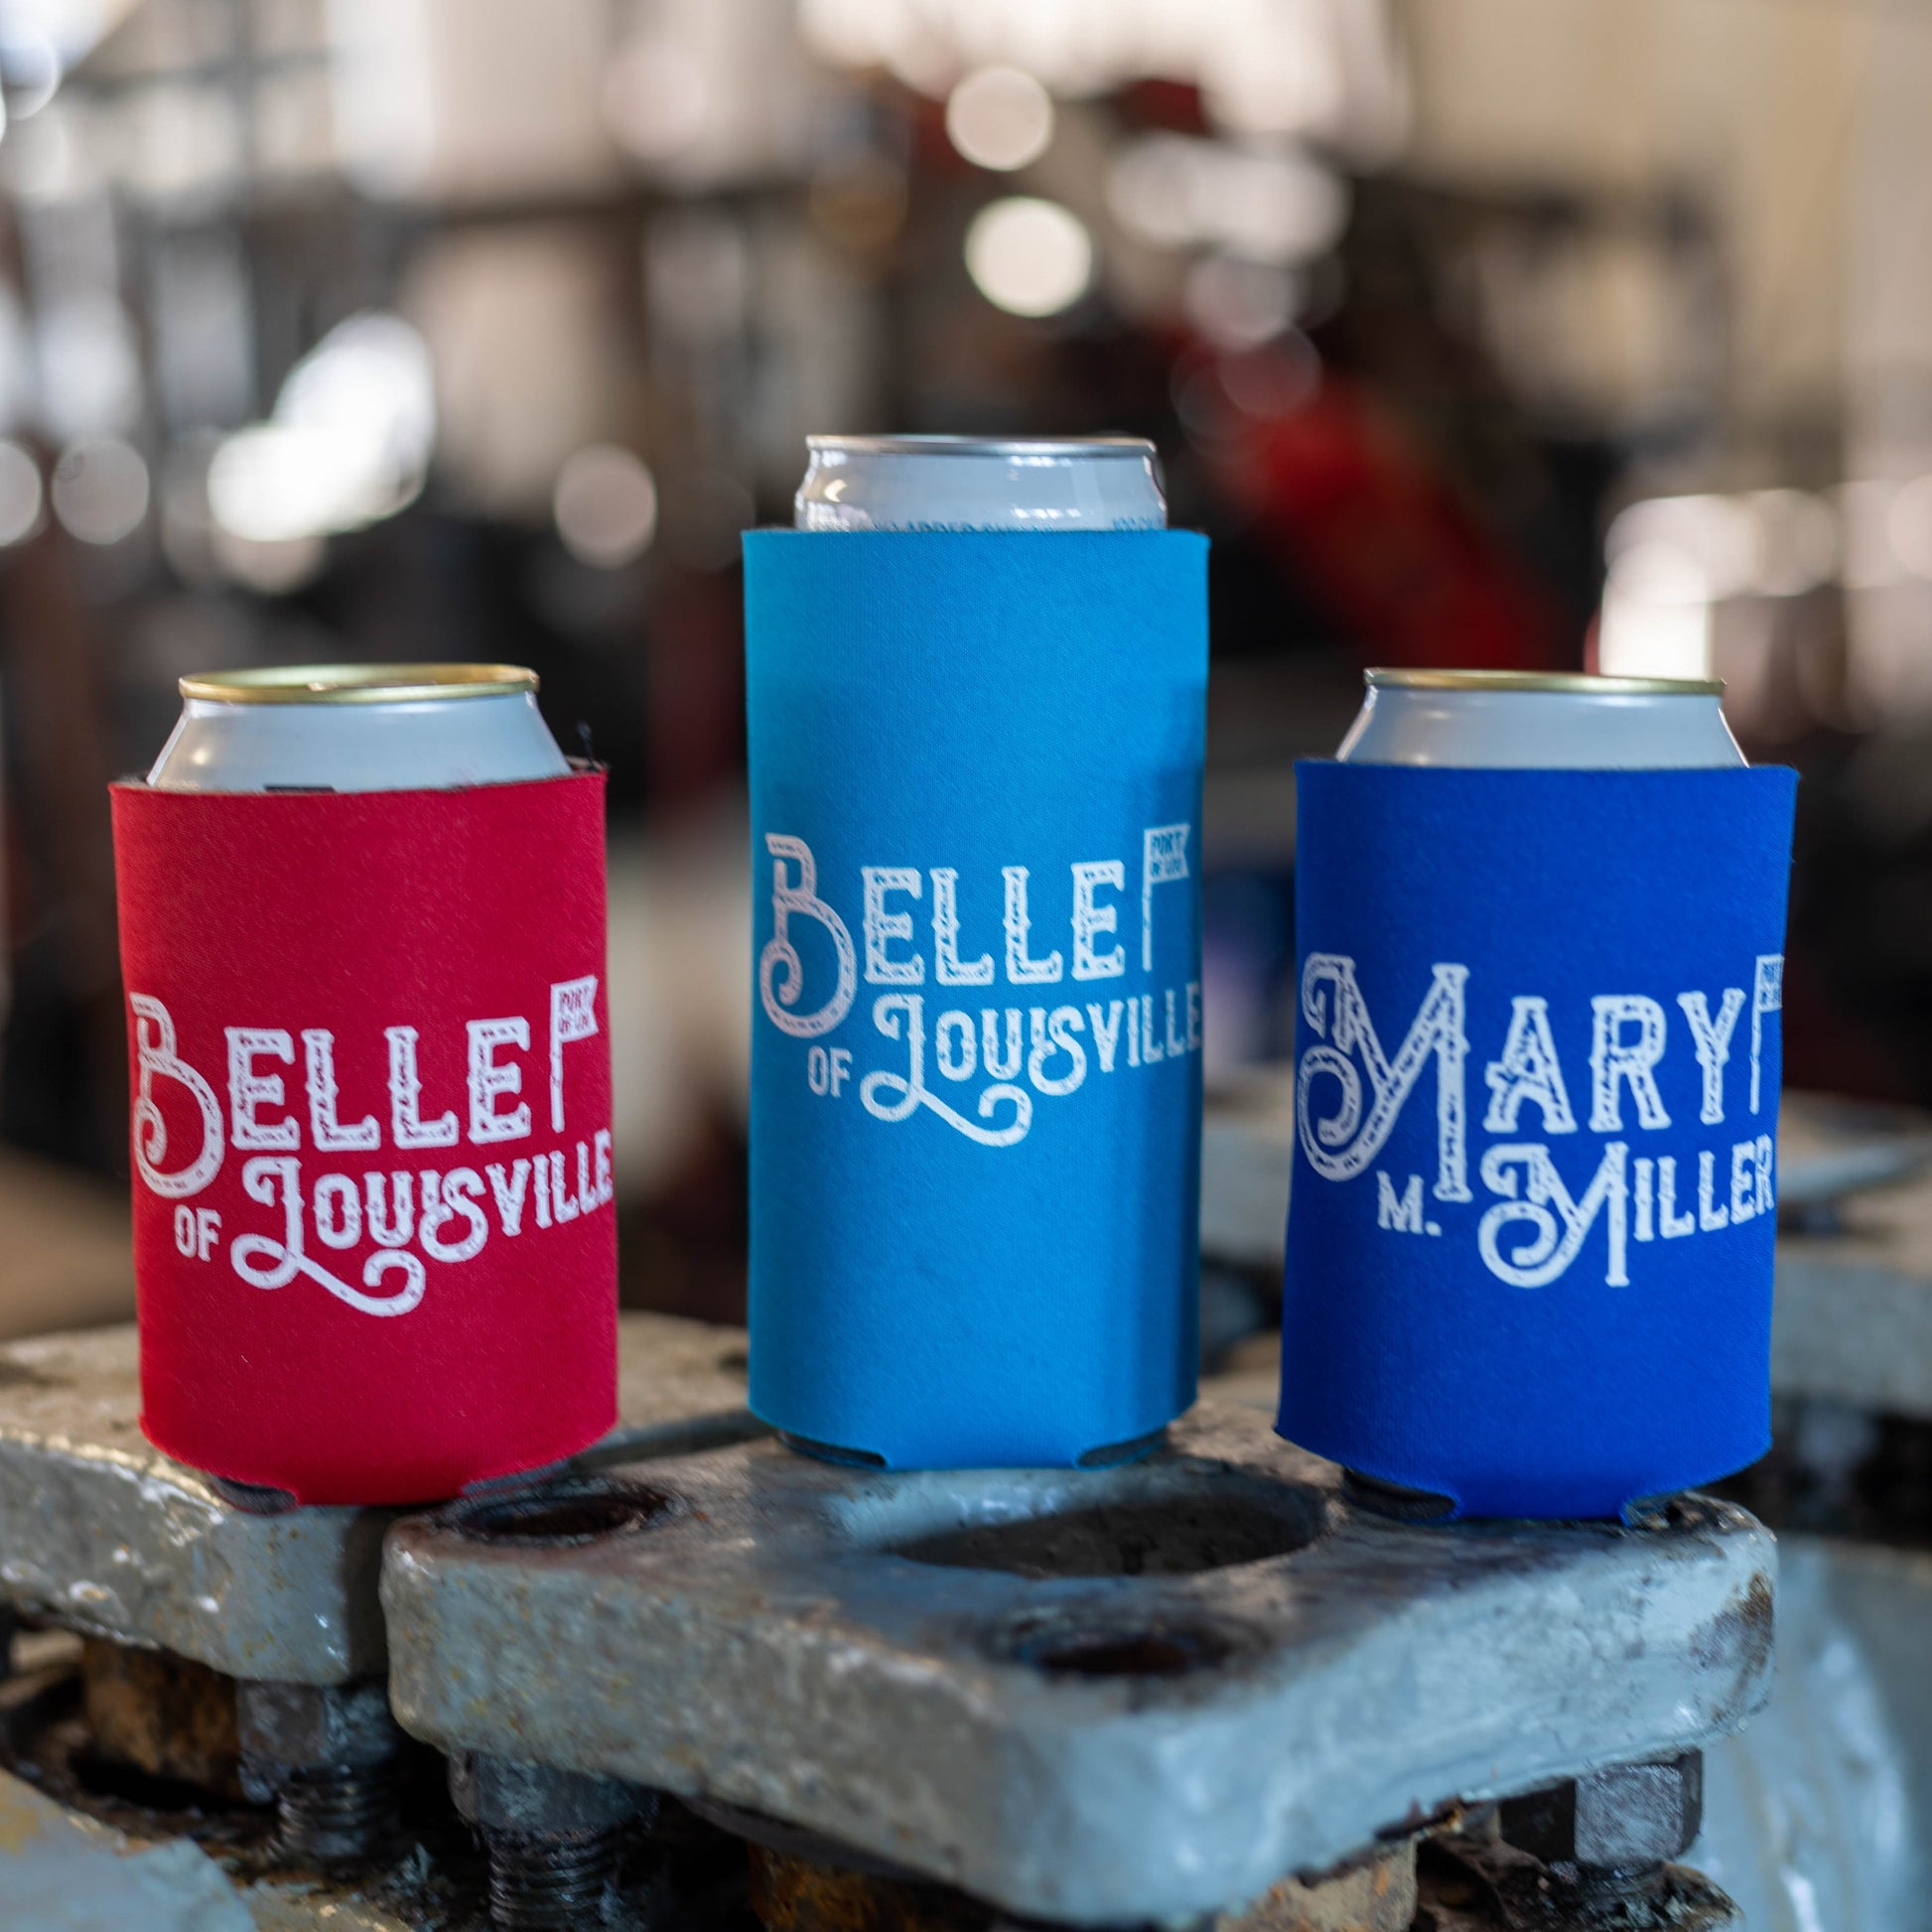 Three foam coozies on drink cans; left is red with white "Belle of Louisville" text on a regular 12oz can, middle is light blue with white "Belle of Louisville" text on a tall, slim 12oz can, right is dark blue with white "Mary M Miller" text on  regular 12oz can